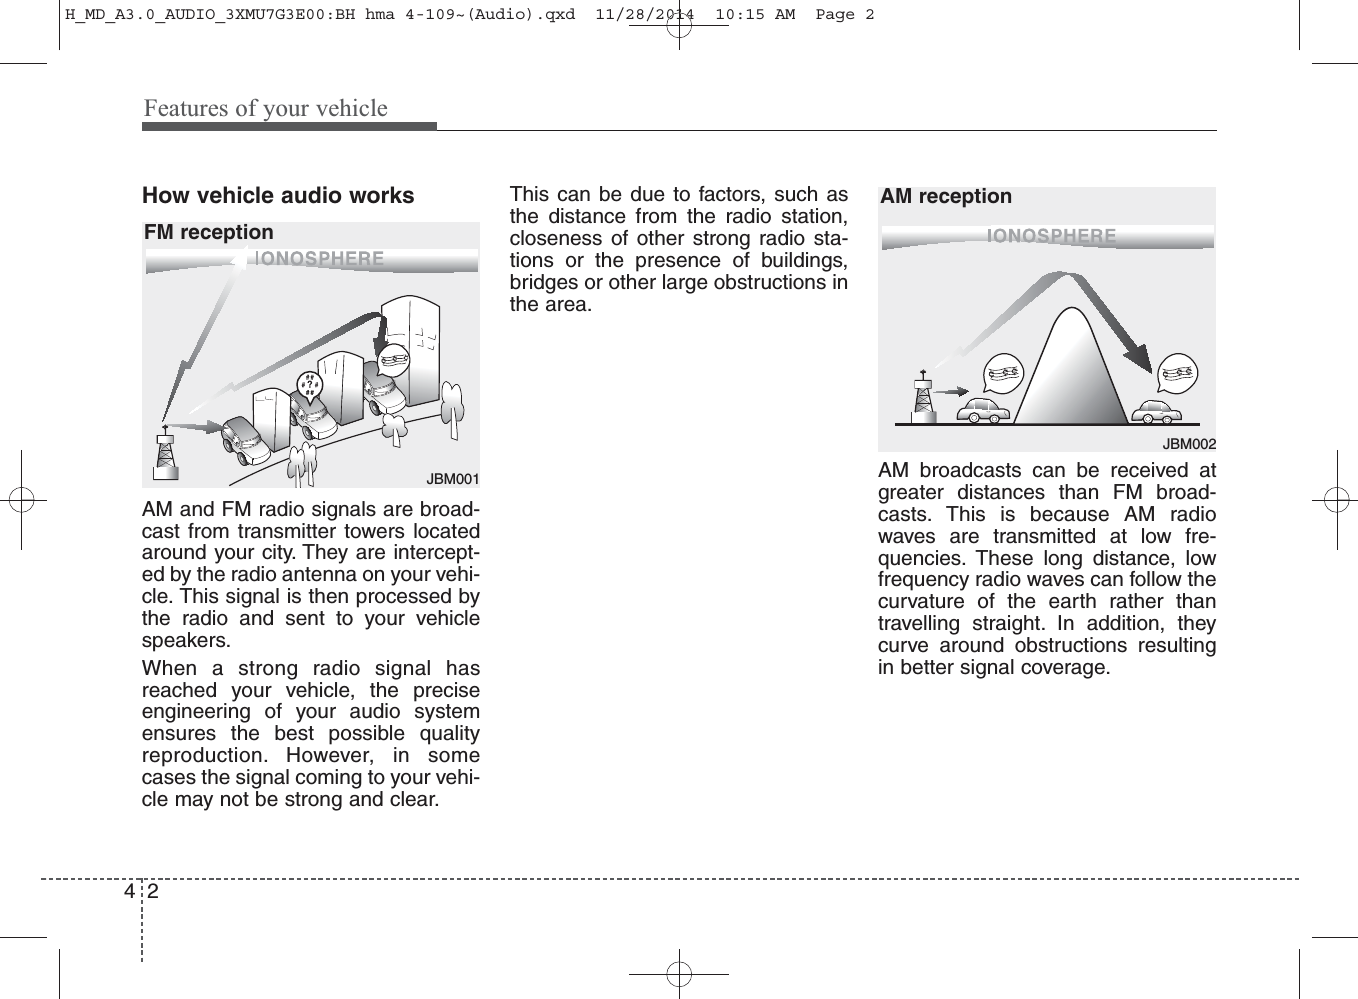 Features of your vehicle24How vehicle audio worksAM and FM radio signals are broad-cast from transmitter towers locatedaround your city. They are intercept-ed by the radio antenna on your vehi-cle. This signal is then processed bythe radio and sent to your vehiclespeakers. When a strong radio signal hasreached your vehicle, the preciseengineering of your audio systemensures the best possible qualityreproduction. However, in somecases the signal coming to your vehi-cle may not be strong and clear. This can be due to factors, such asthe distance from the radio station,closeness of other strong radio sta-tions or the presence of buildings,bridges or other large obstructions inthe area.AM broadcasts can be received atgreater distances than FM broad-casts. This is because AM radiowaves are transmitted at low fre-quencies. These long distance, lowfrequency radio waves can follow thecurvature of the earth rather thantravelling straight. In addition, theycurve around obstructions resultingin better signal coverage.¢¢¢JBM001FM reception¢¢¢¢¢¢JBM002AM receptionH_MD_A3.0_AUDIO_3XMU7G3E00:BH hma 4-109~(Audio).qxd  11/28/2014  10:15 AM  Page 2